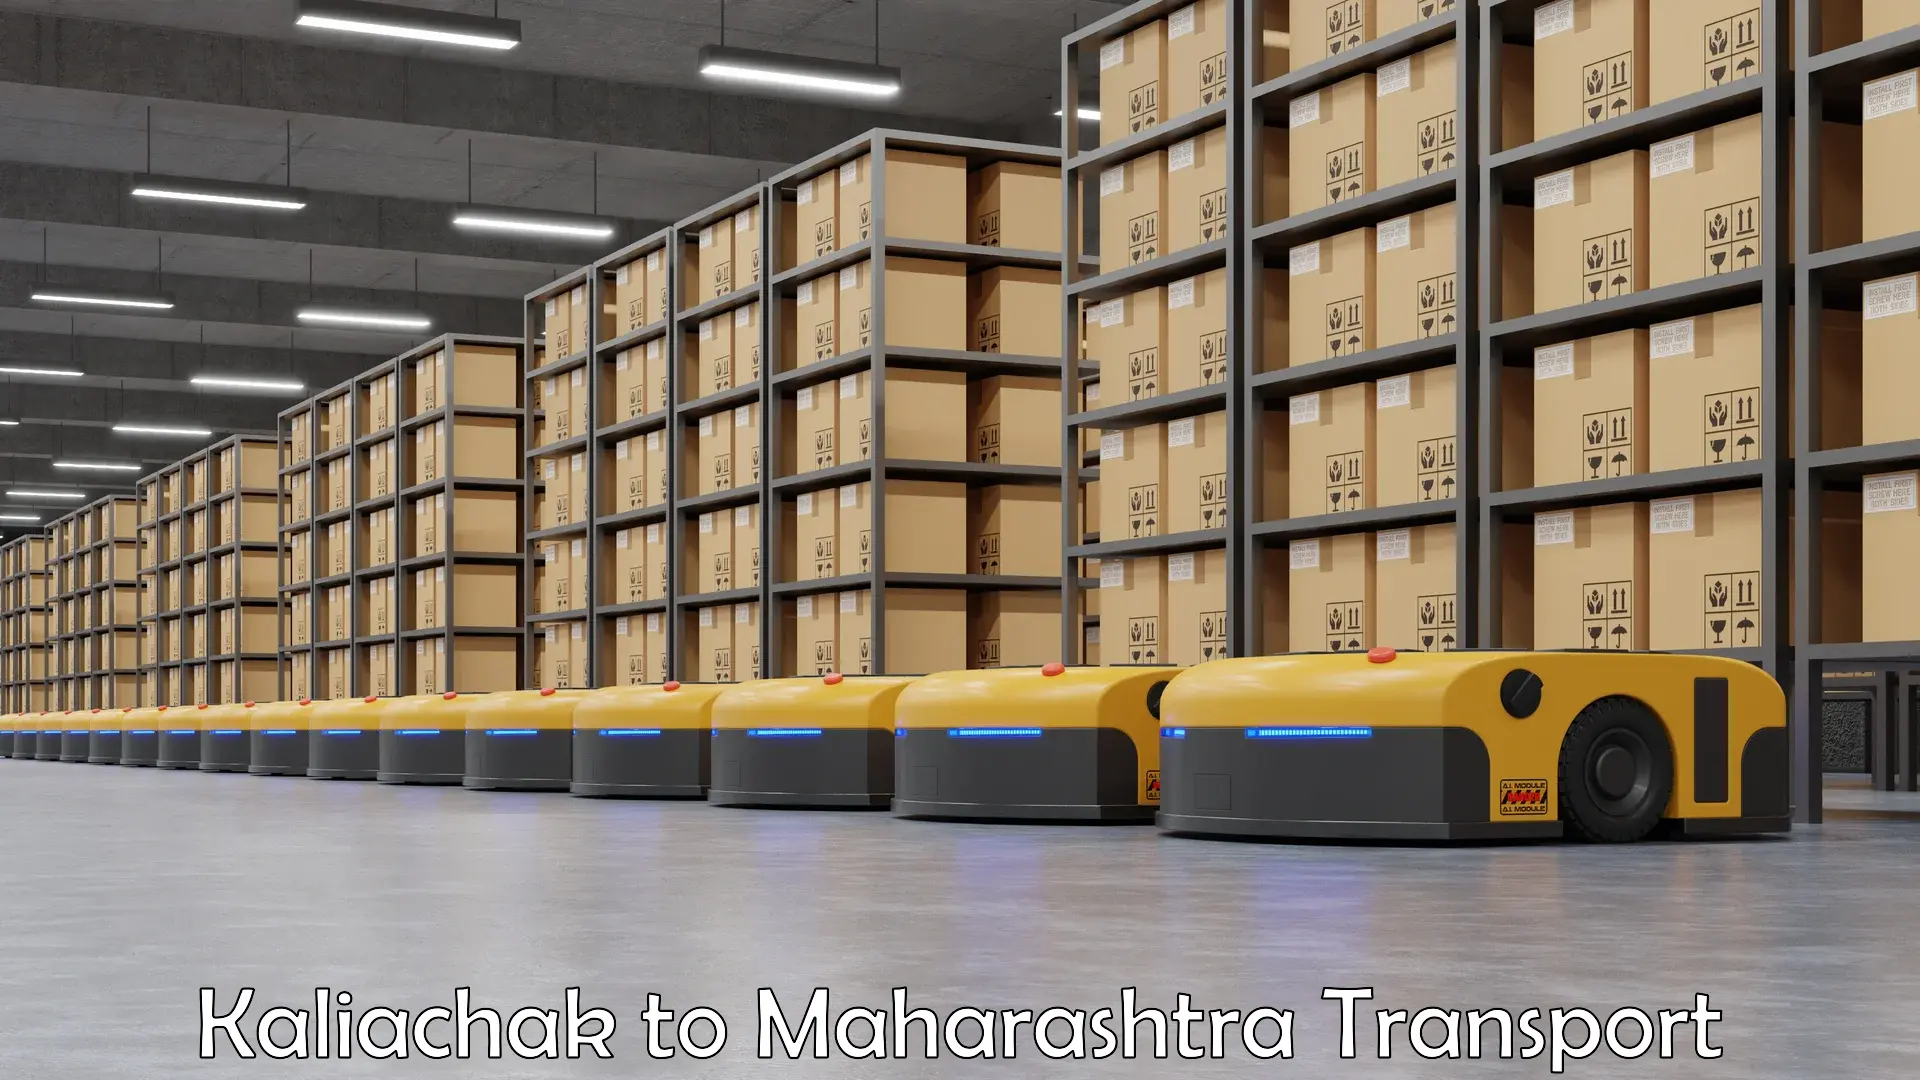 Transport bike from one state to another Kaliachak to IIT Mumbai